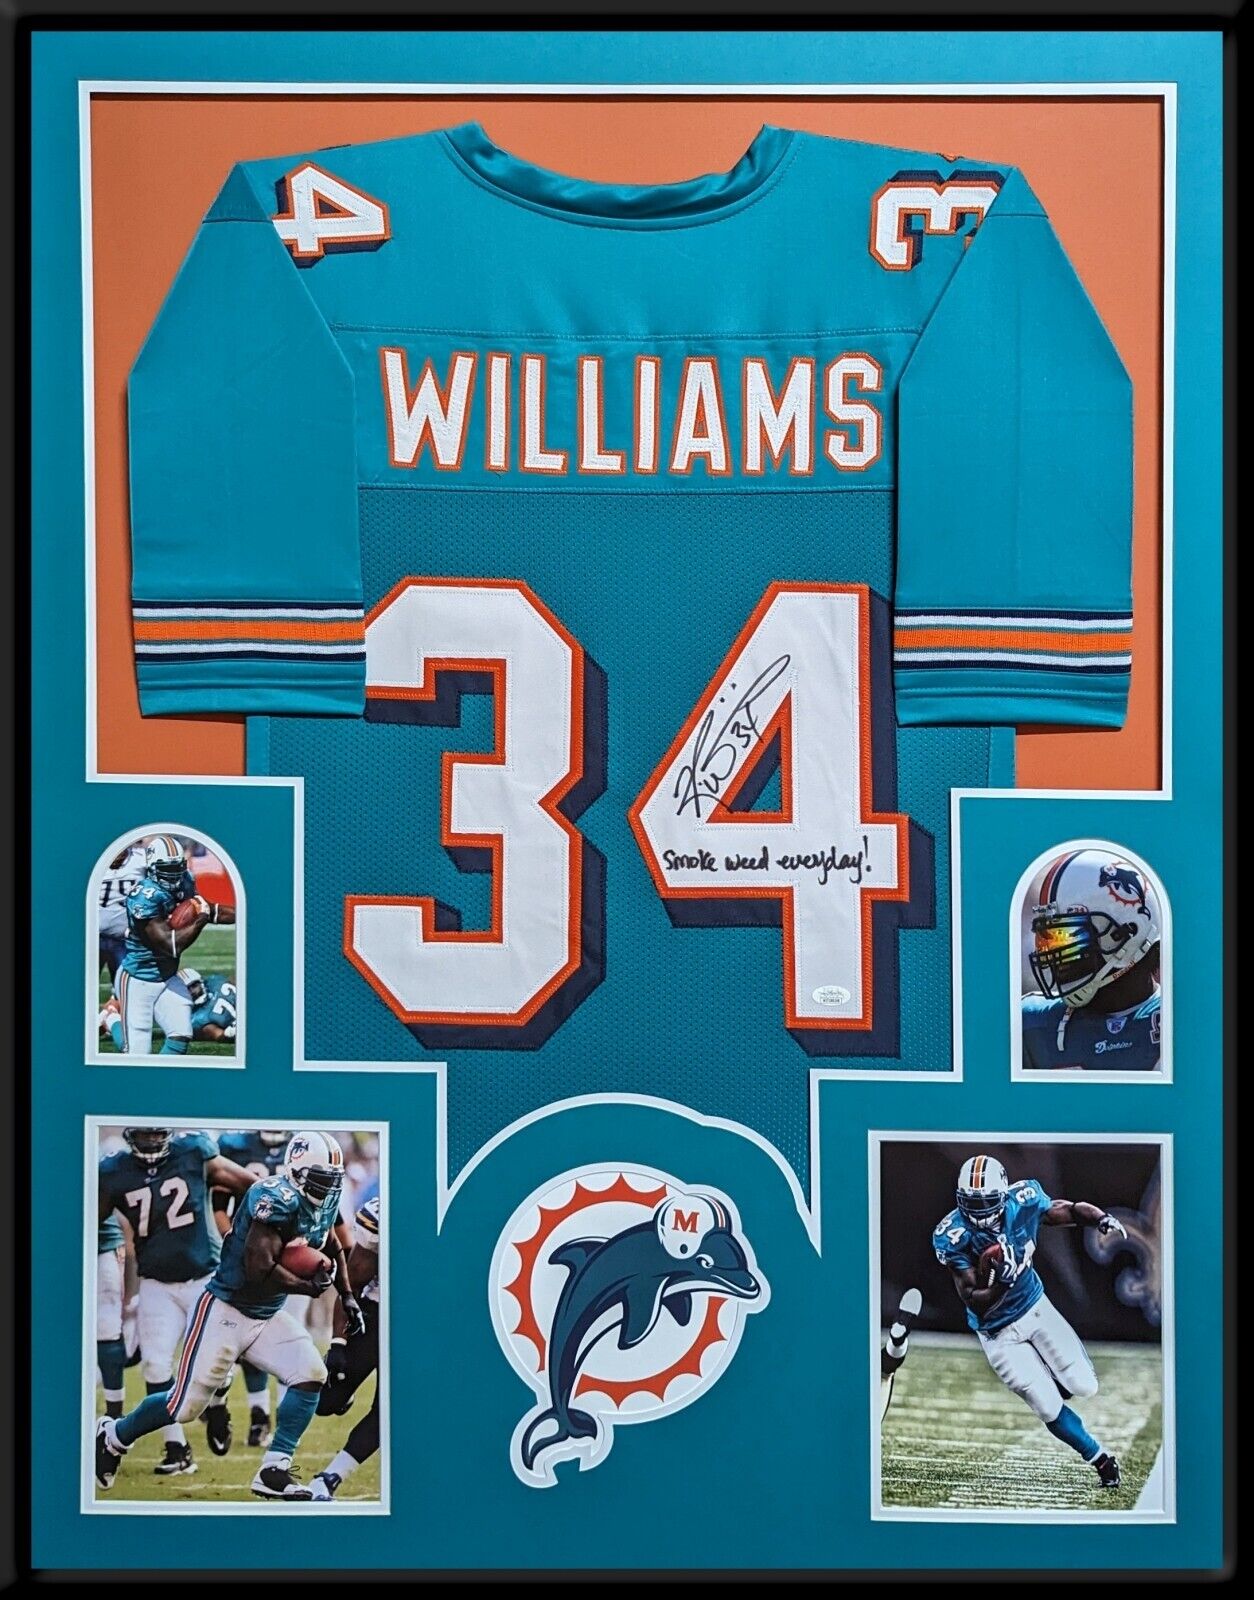 MVP Authentics Framed Miami Dolphins Ricky Williams Autographed Signed Inscribed Jersey Jsa Coa 495 sports jersey framing , jersey framing